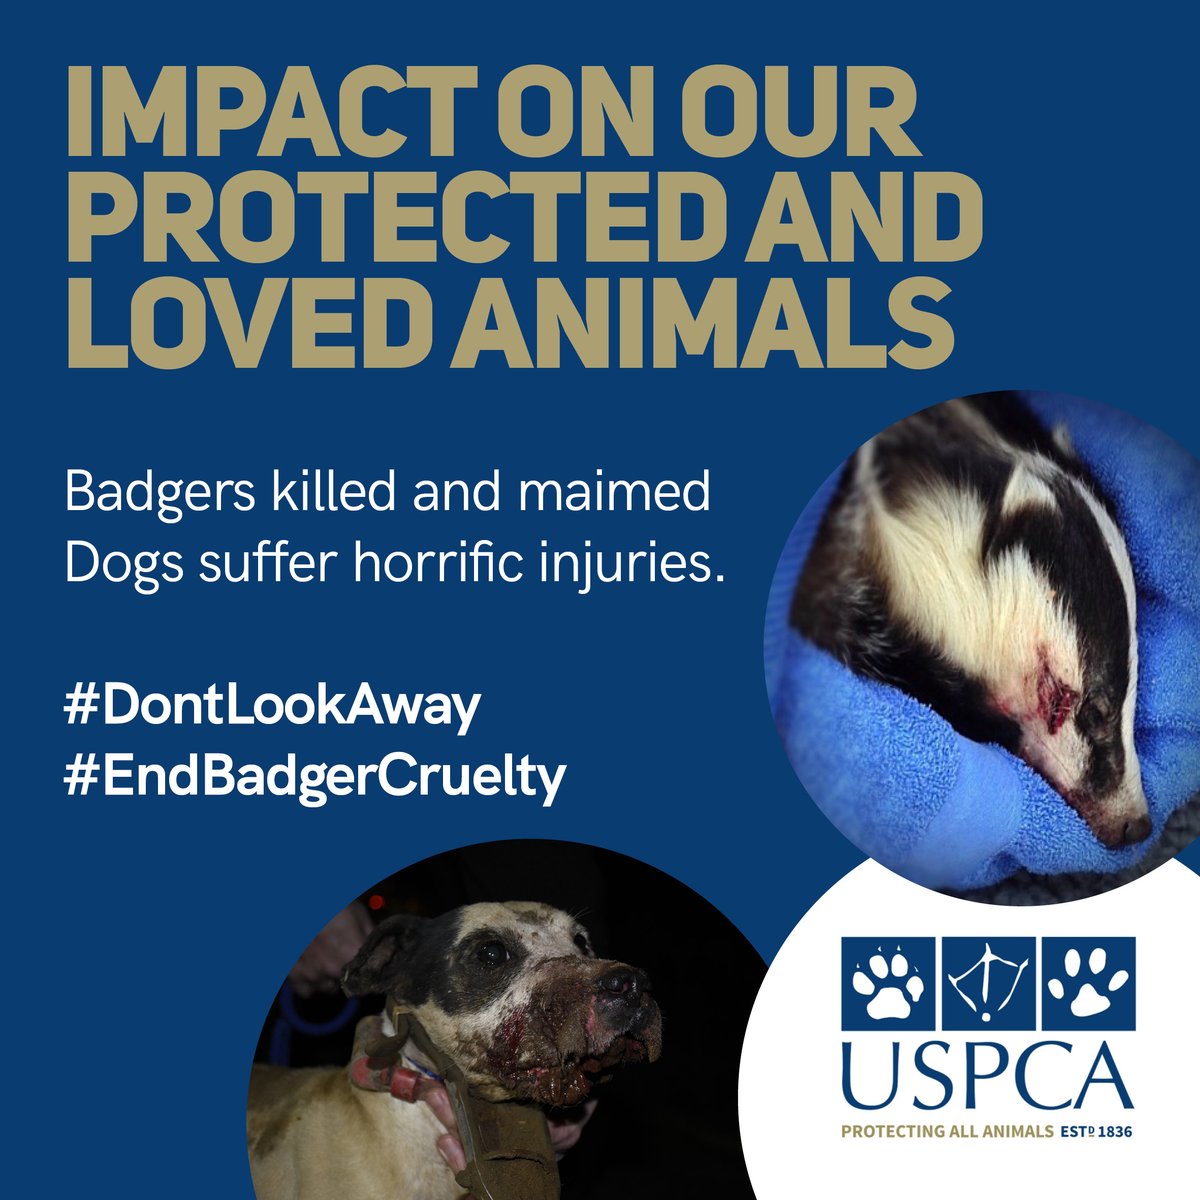 At our most conservative estimates, there are over 150 active Badger Baiters in Northern Ireland, many more operate unreported and unprosecuted. 

#EndBadgerBaiting #EndBadgerCruelty #AnimalsMatter #USPCA